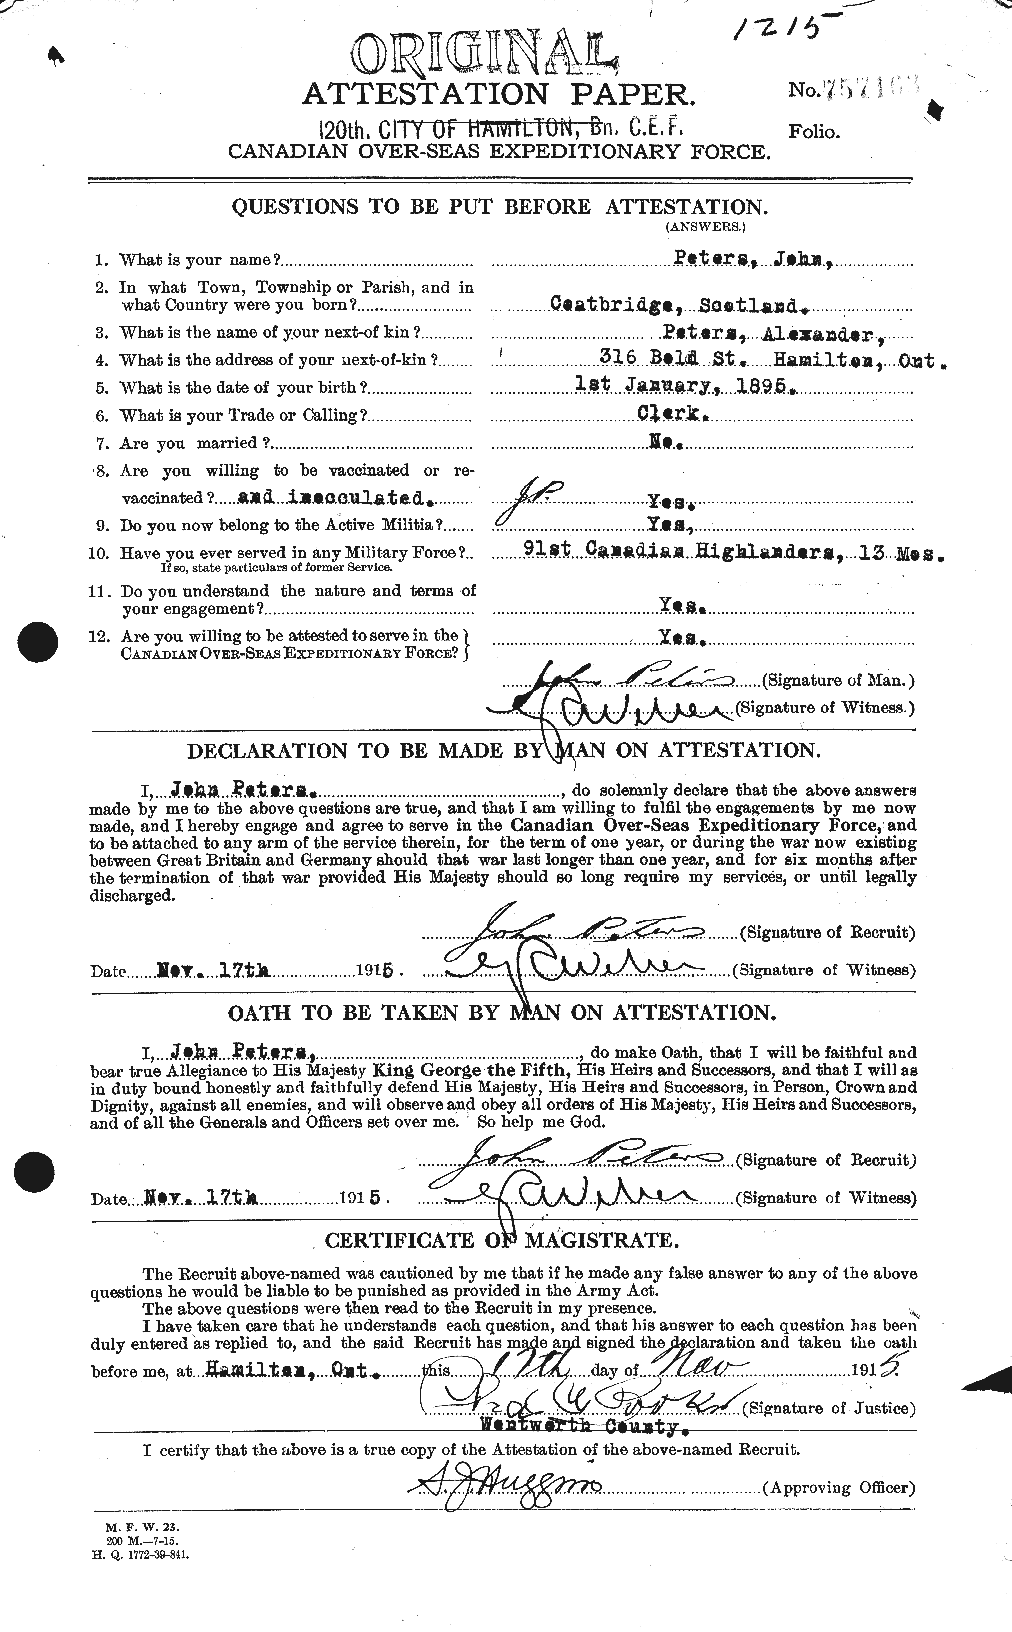 Personnel Records of the First World War - CEF 575536a